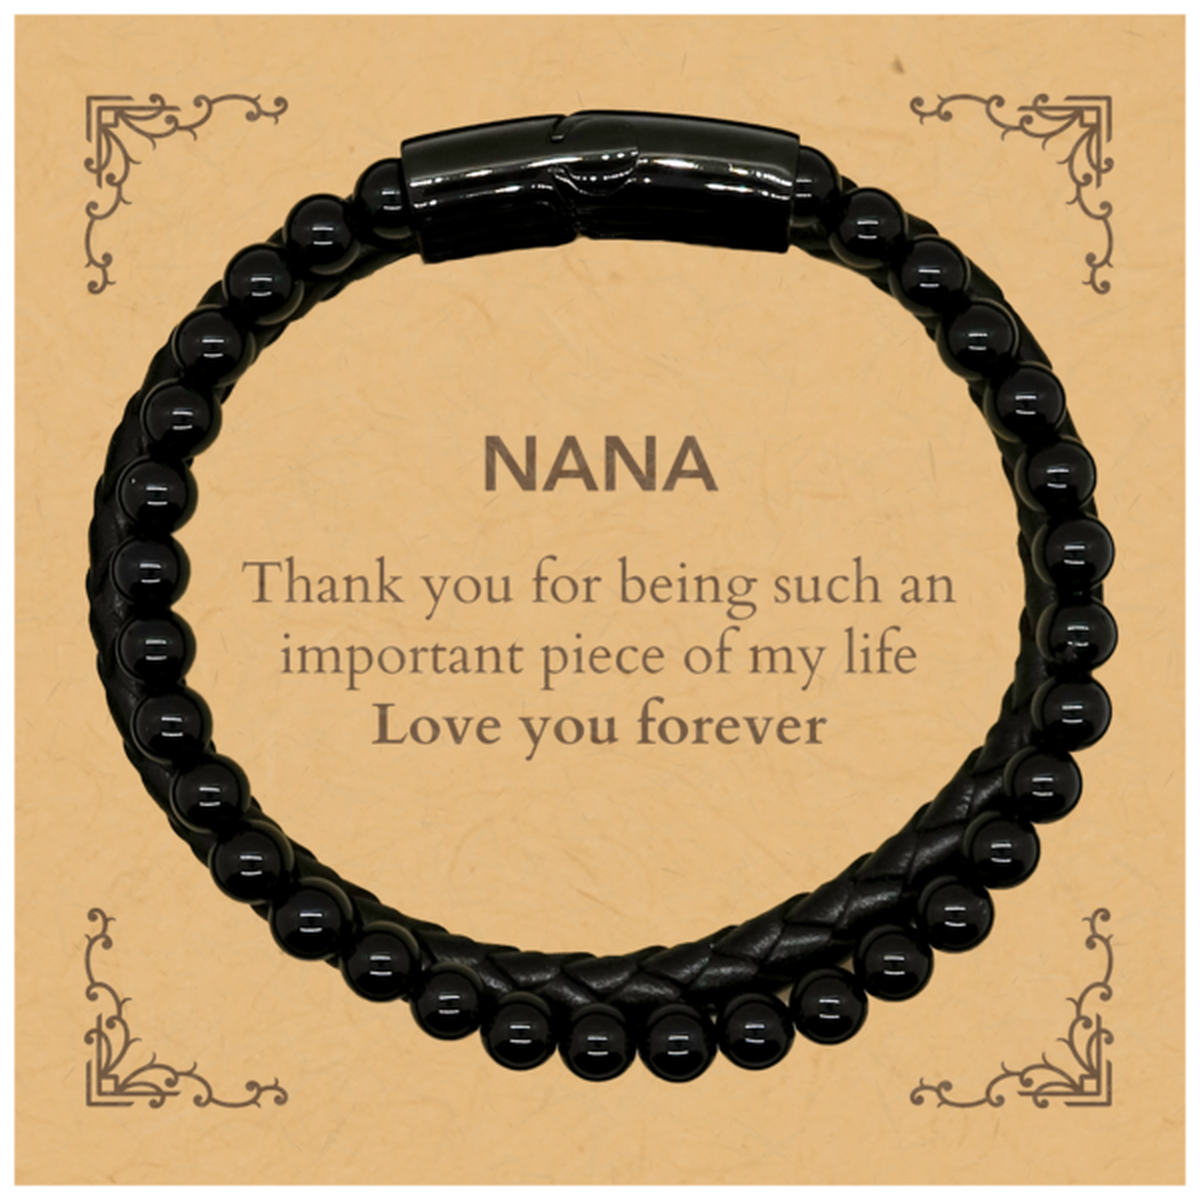 Appropriate Nana Stone Leather Bracelets Epic Birthday Gifts for Nana Thank you for being such an important piece of my life Nana Christmas Mothers Fathers Day